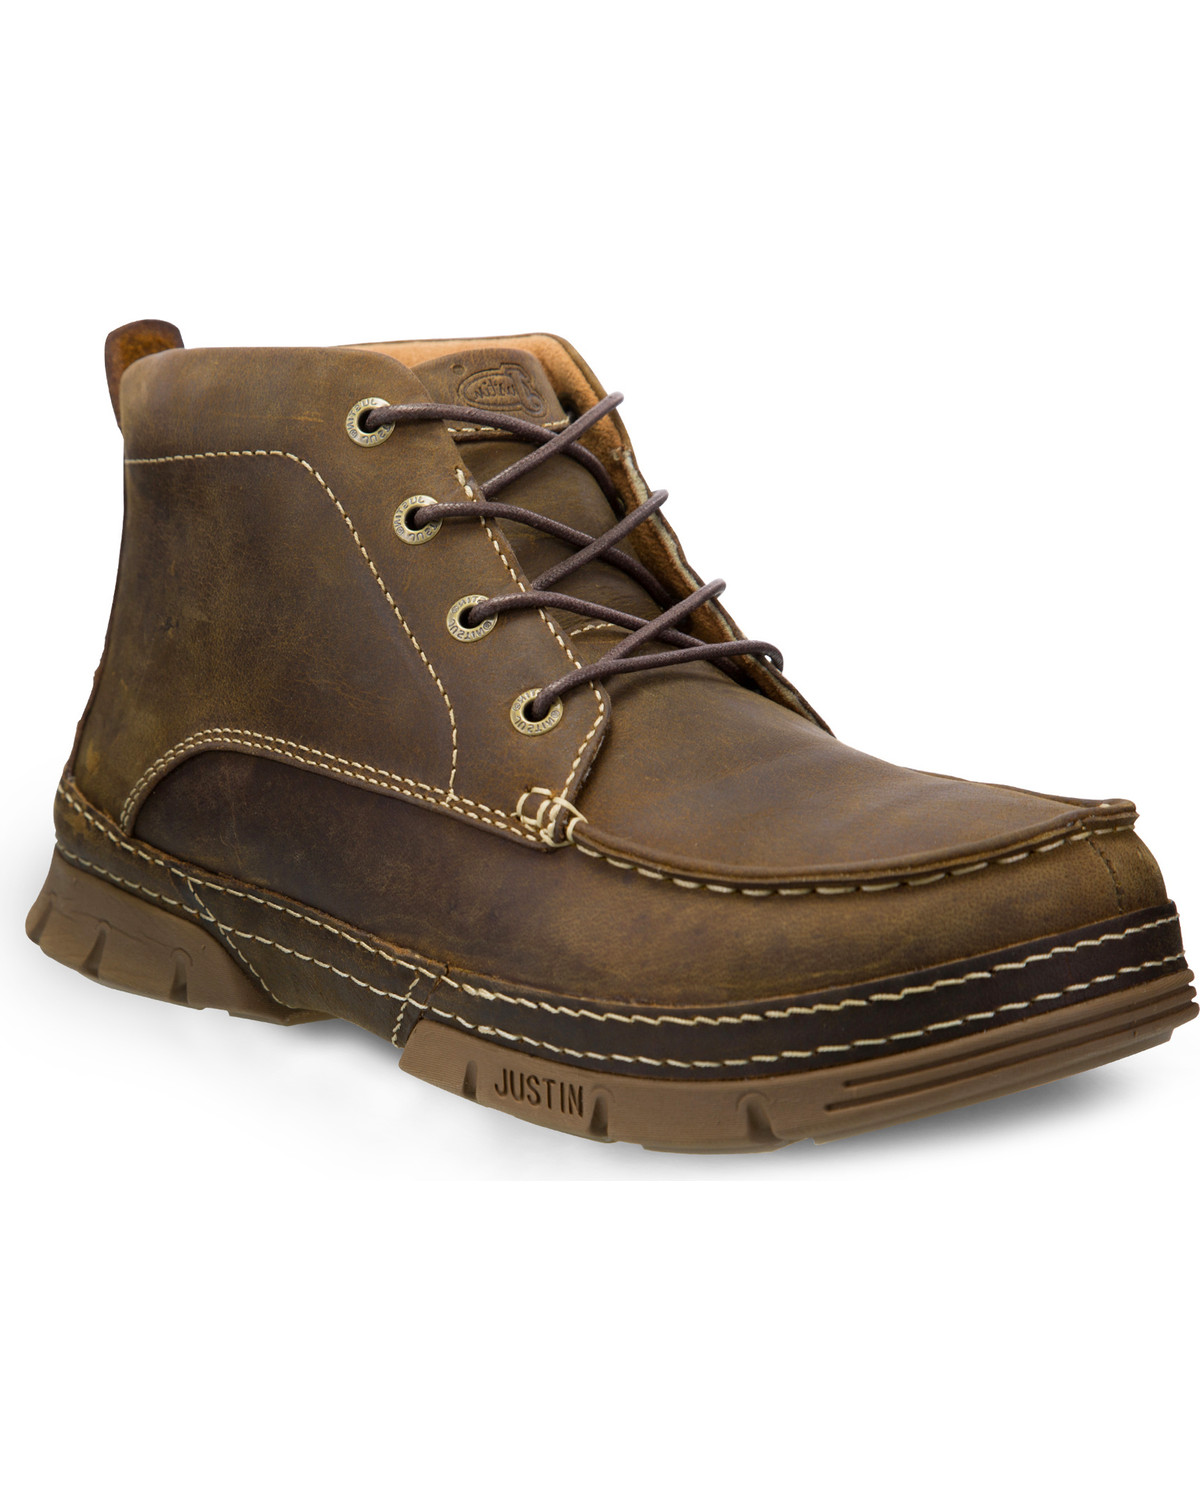 Lace-Up Work Boots - Steel Toe 